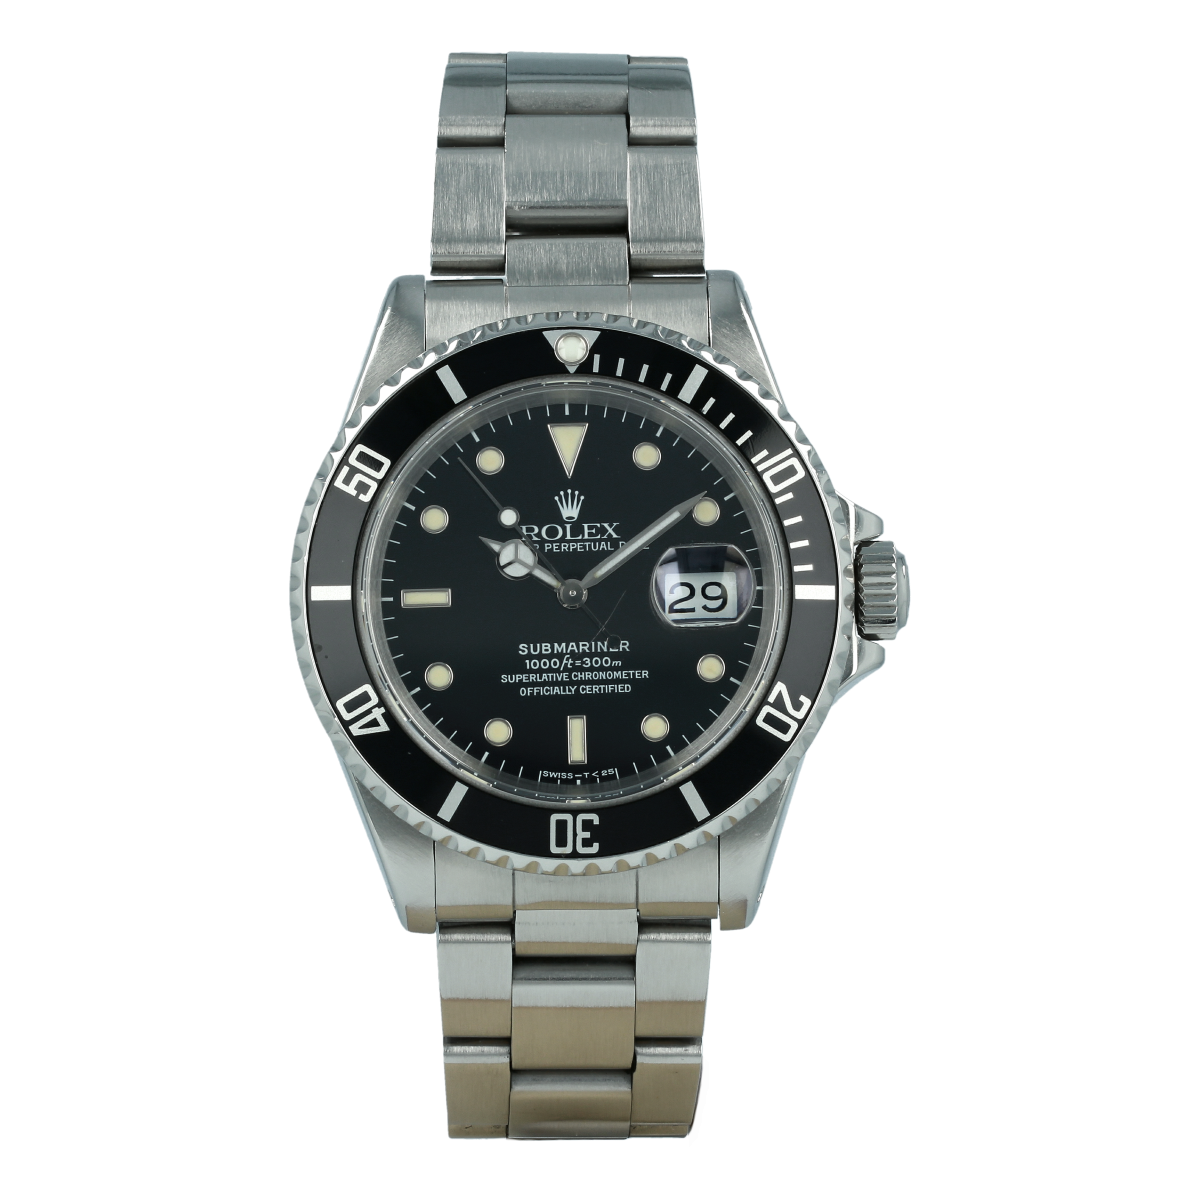 Rolex Submariner Date 16610 (1991) Buy preowned Rolex watch